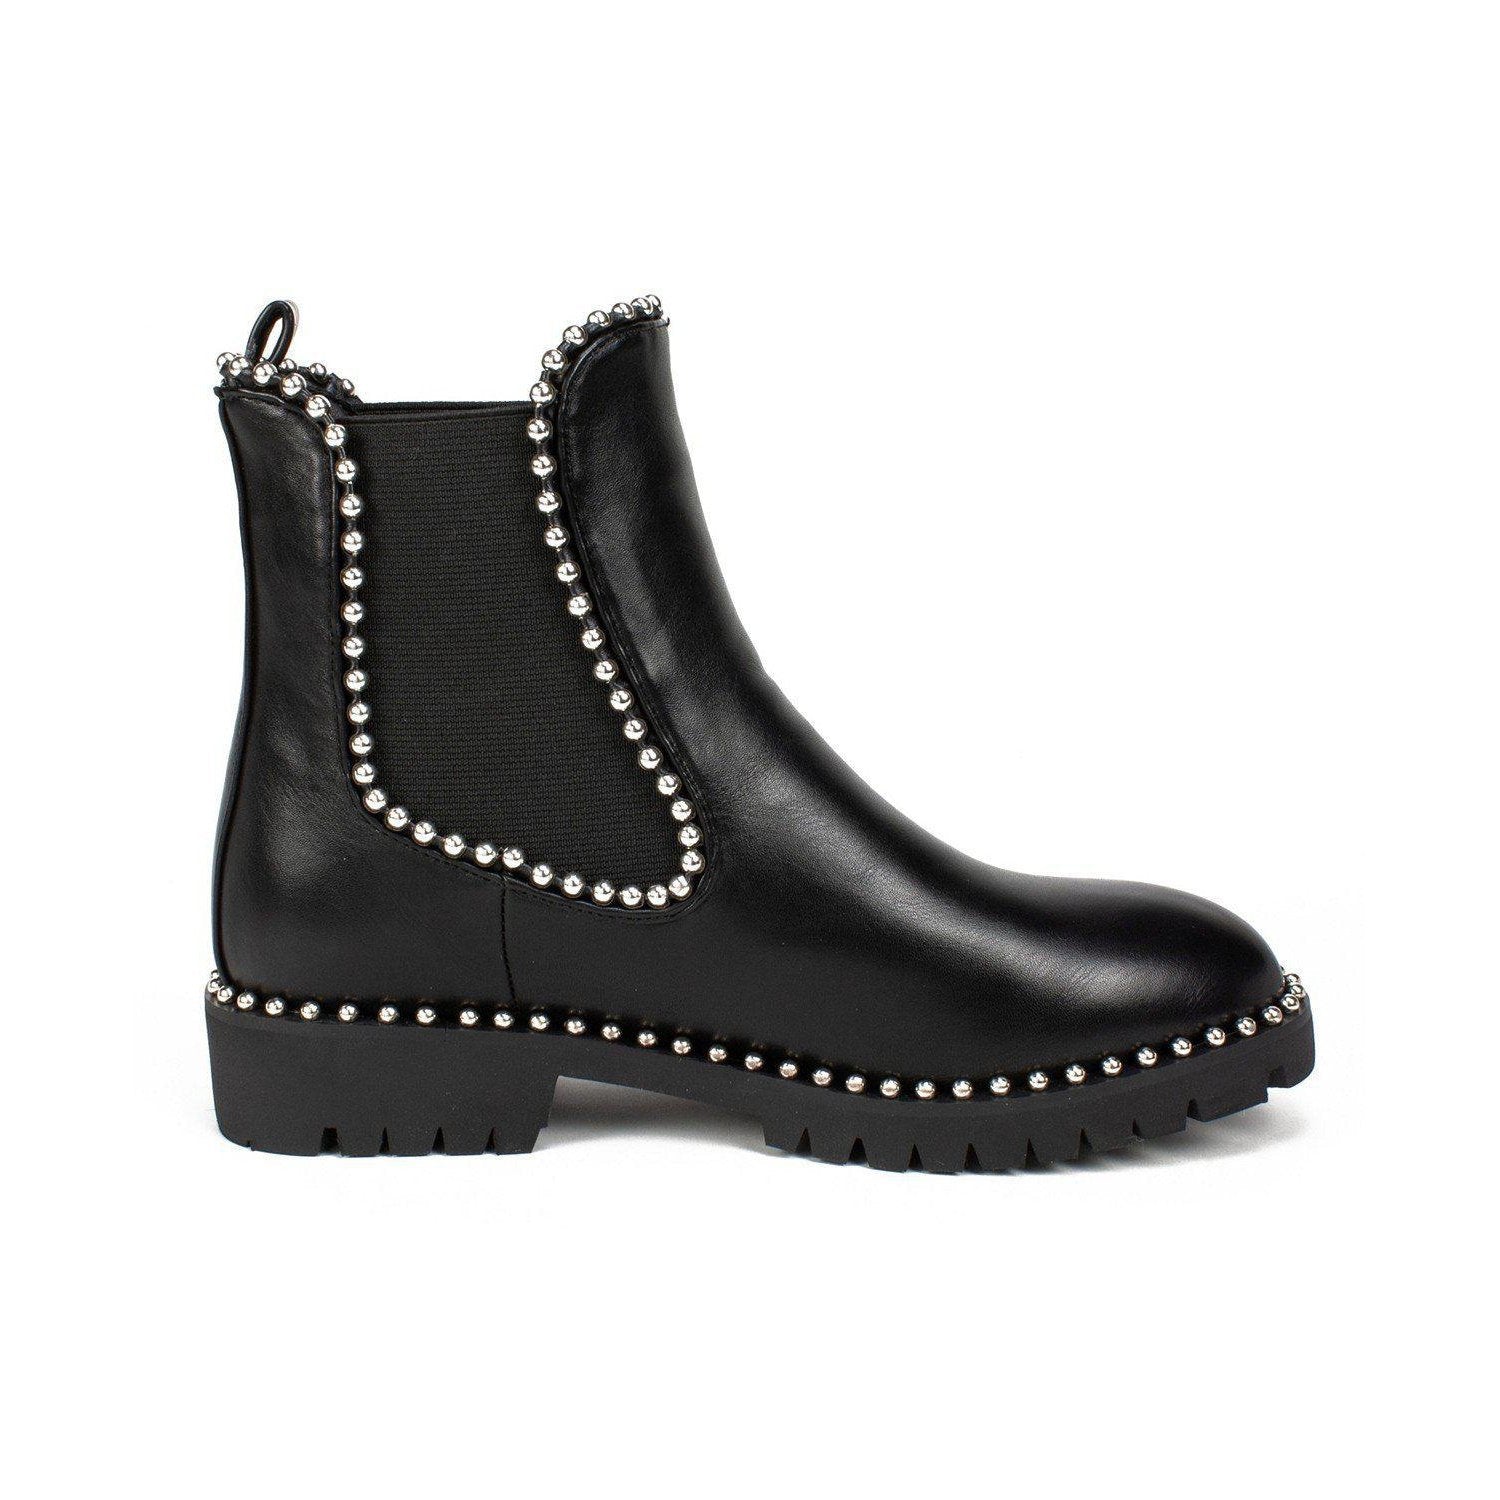 Seven Dials Shelley Studded Ankle Booties